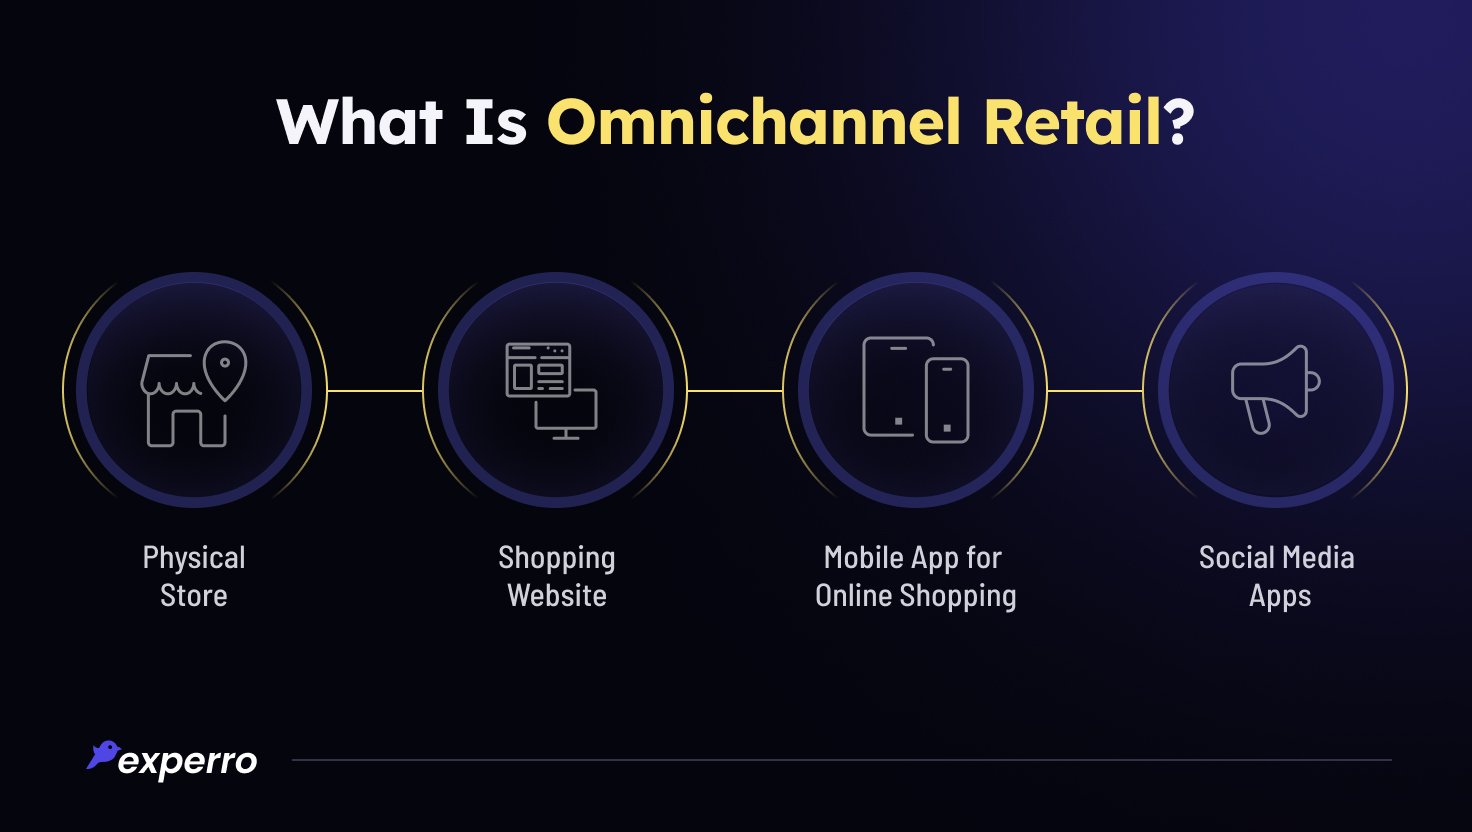 What is Omnichannel Retail?